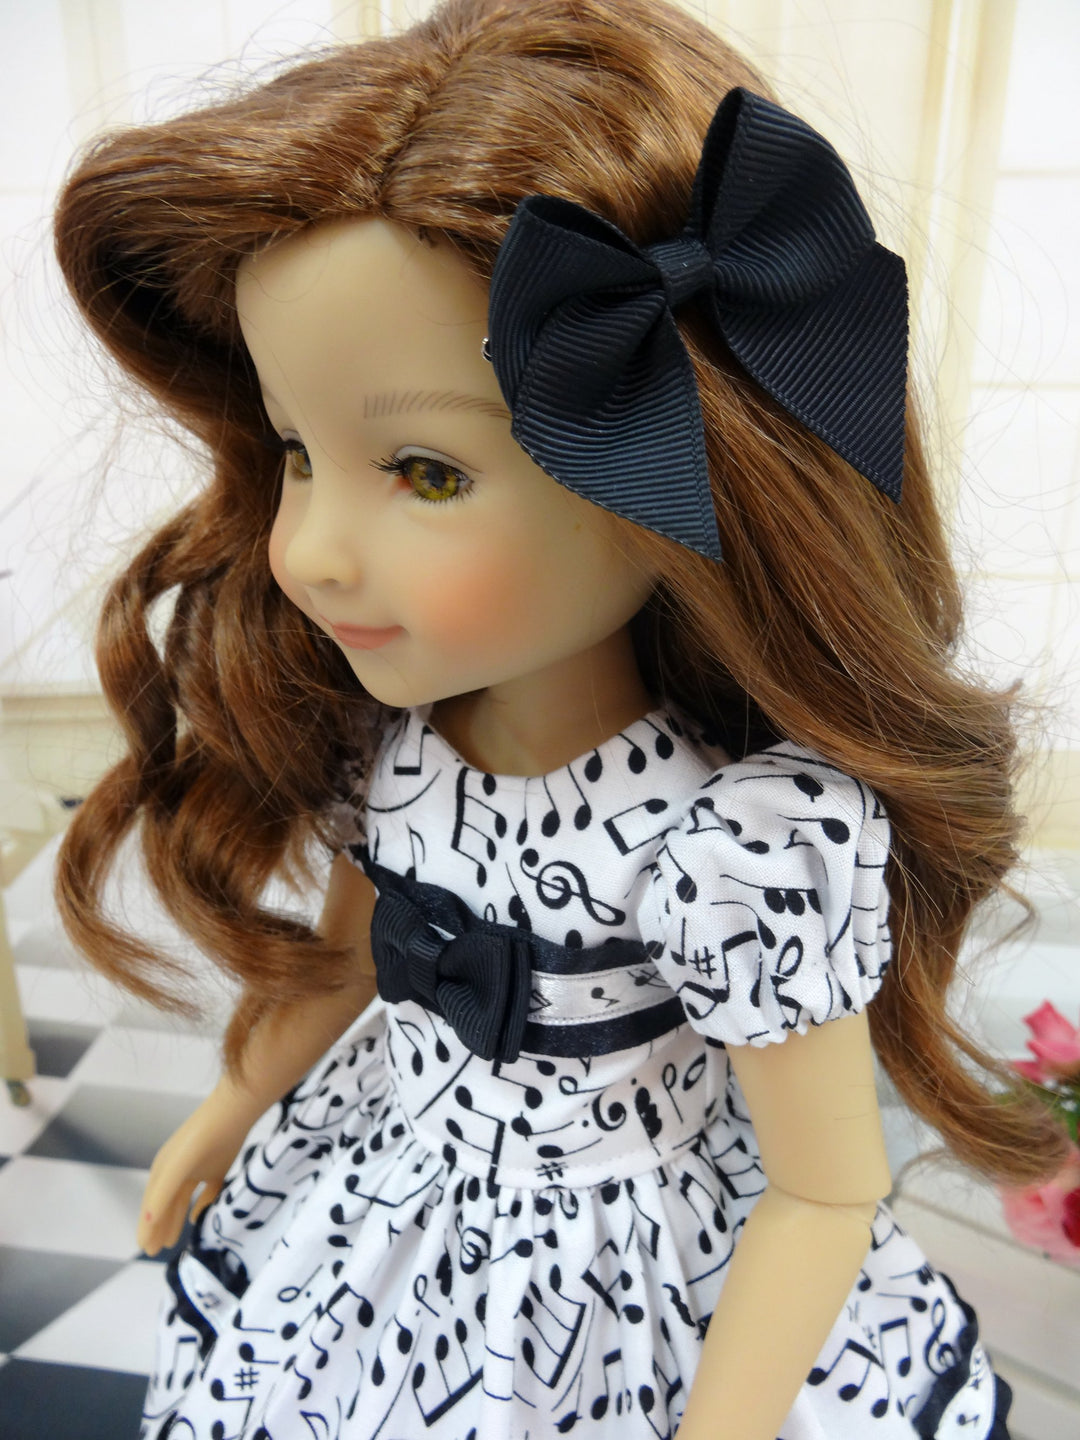 Musical Score - dress for Ruby Red Fashion Friends doll